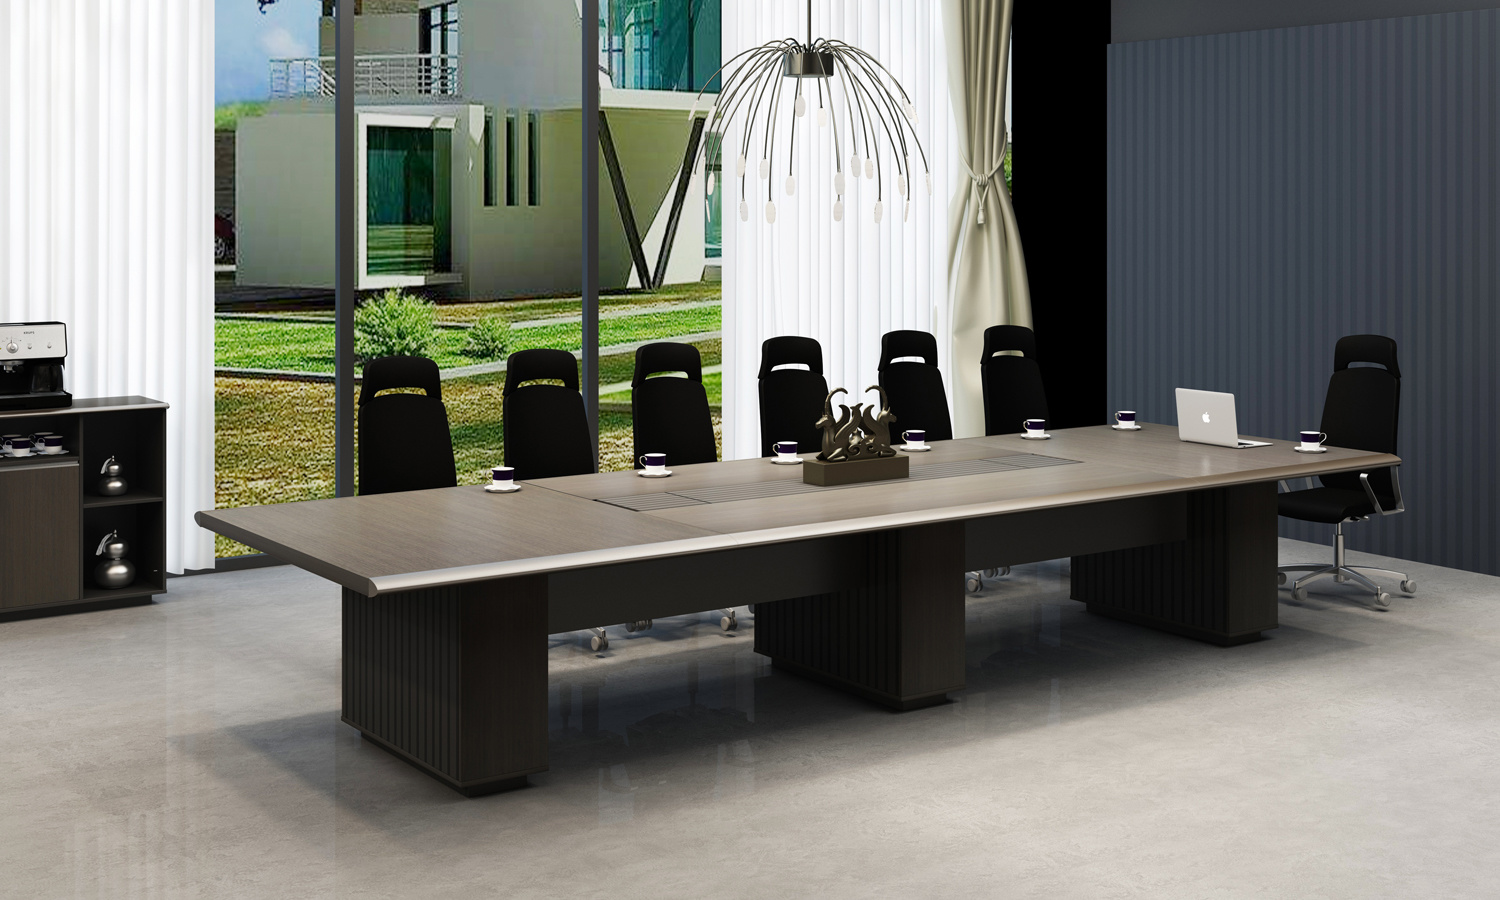  meeting table